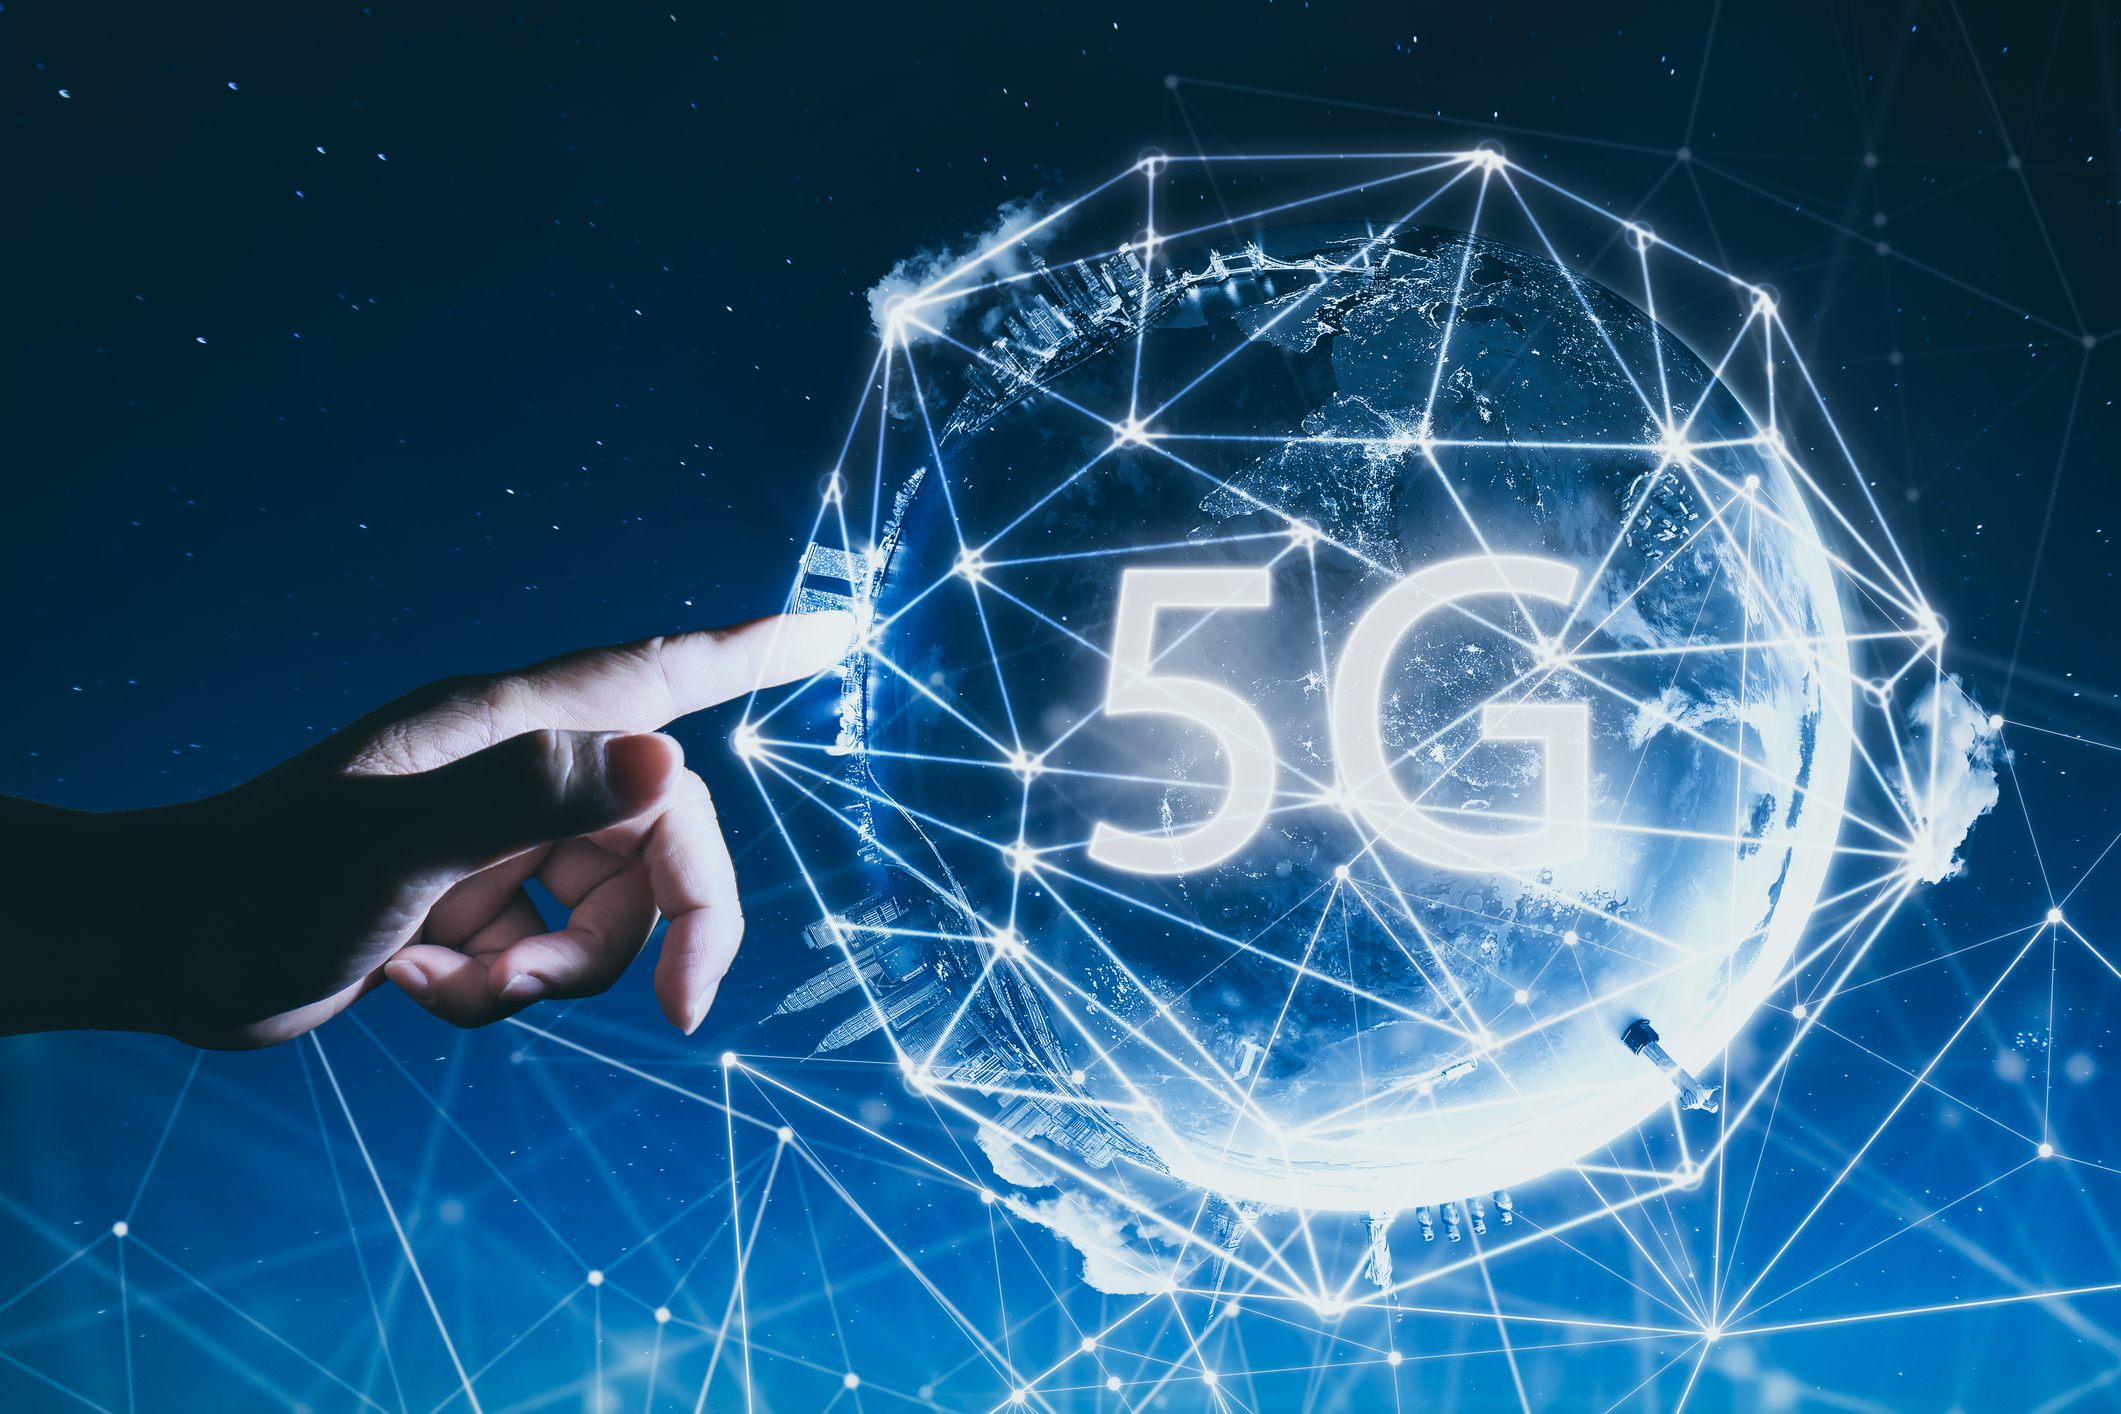 UK Hardware Developers Urged to Take Advantage of Additional 5G Opportunities